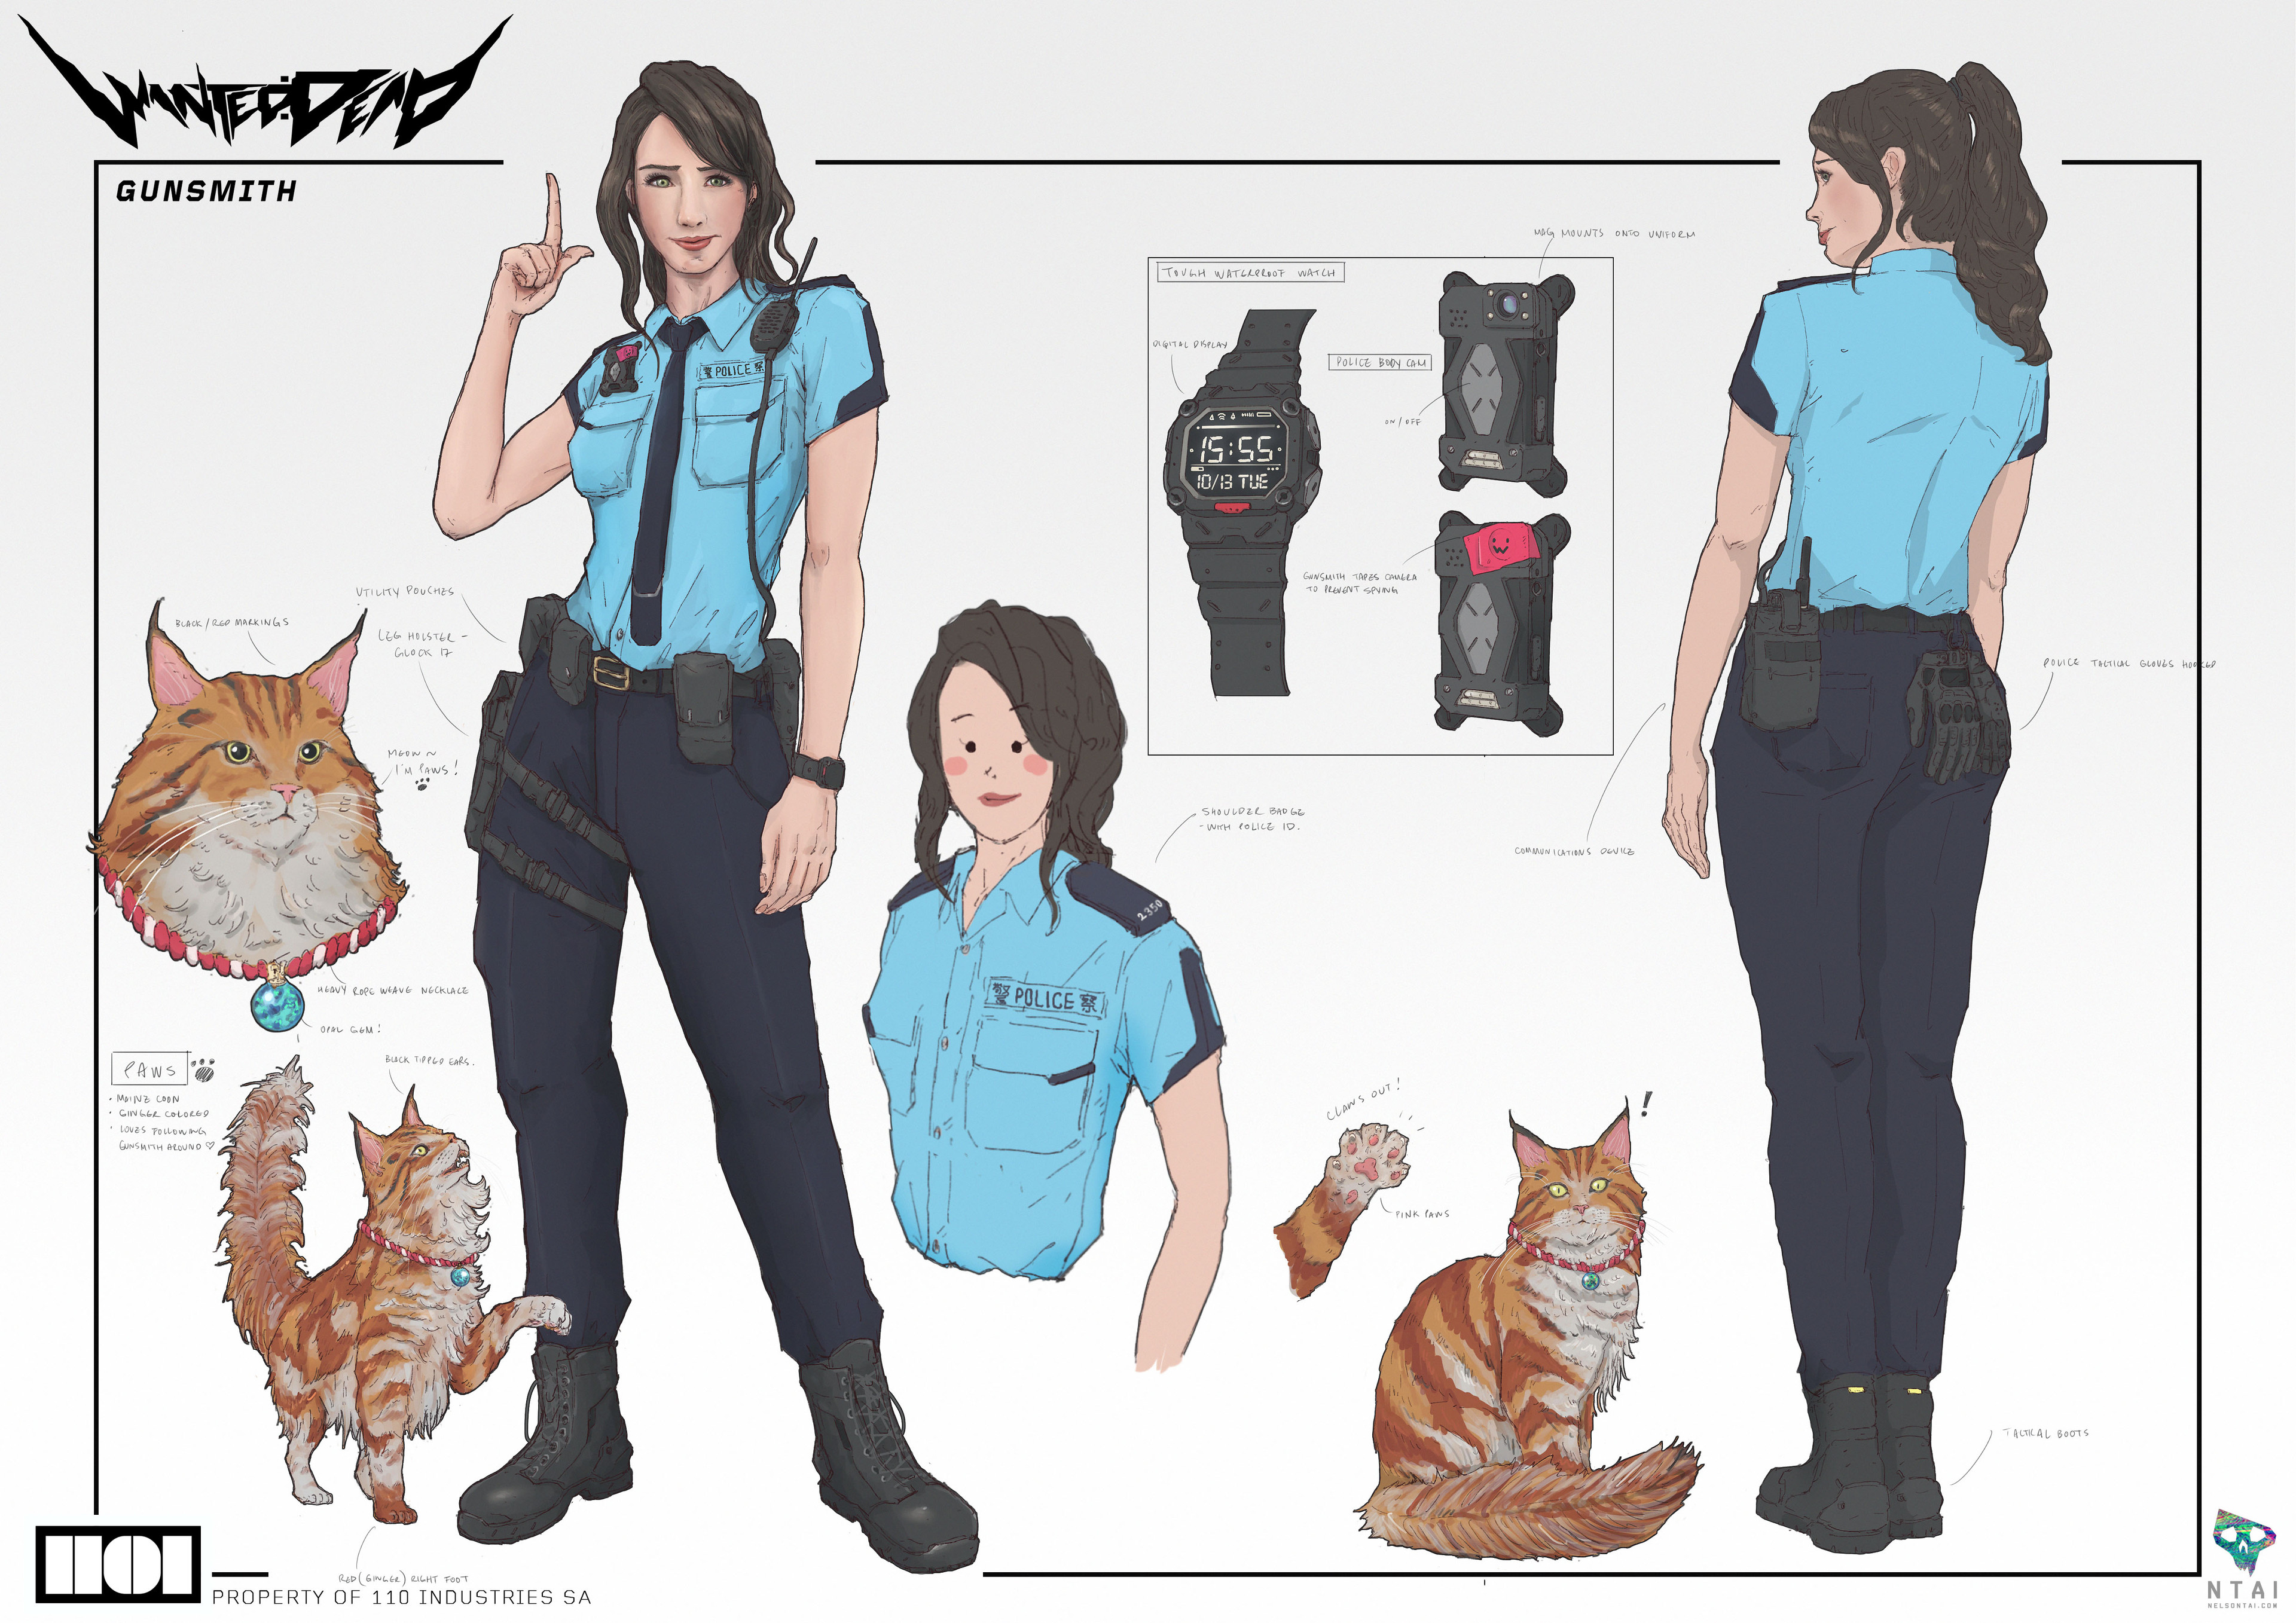 Gunsmith was portrayed by Stefanie Joosten pretty early on. It was definitely fun to match her with Paws. Never thought I would get to design a cat :)